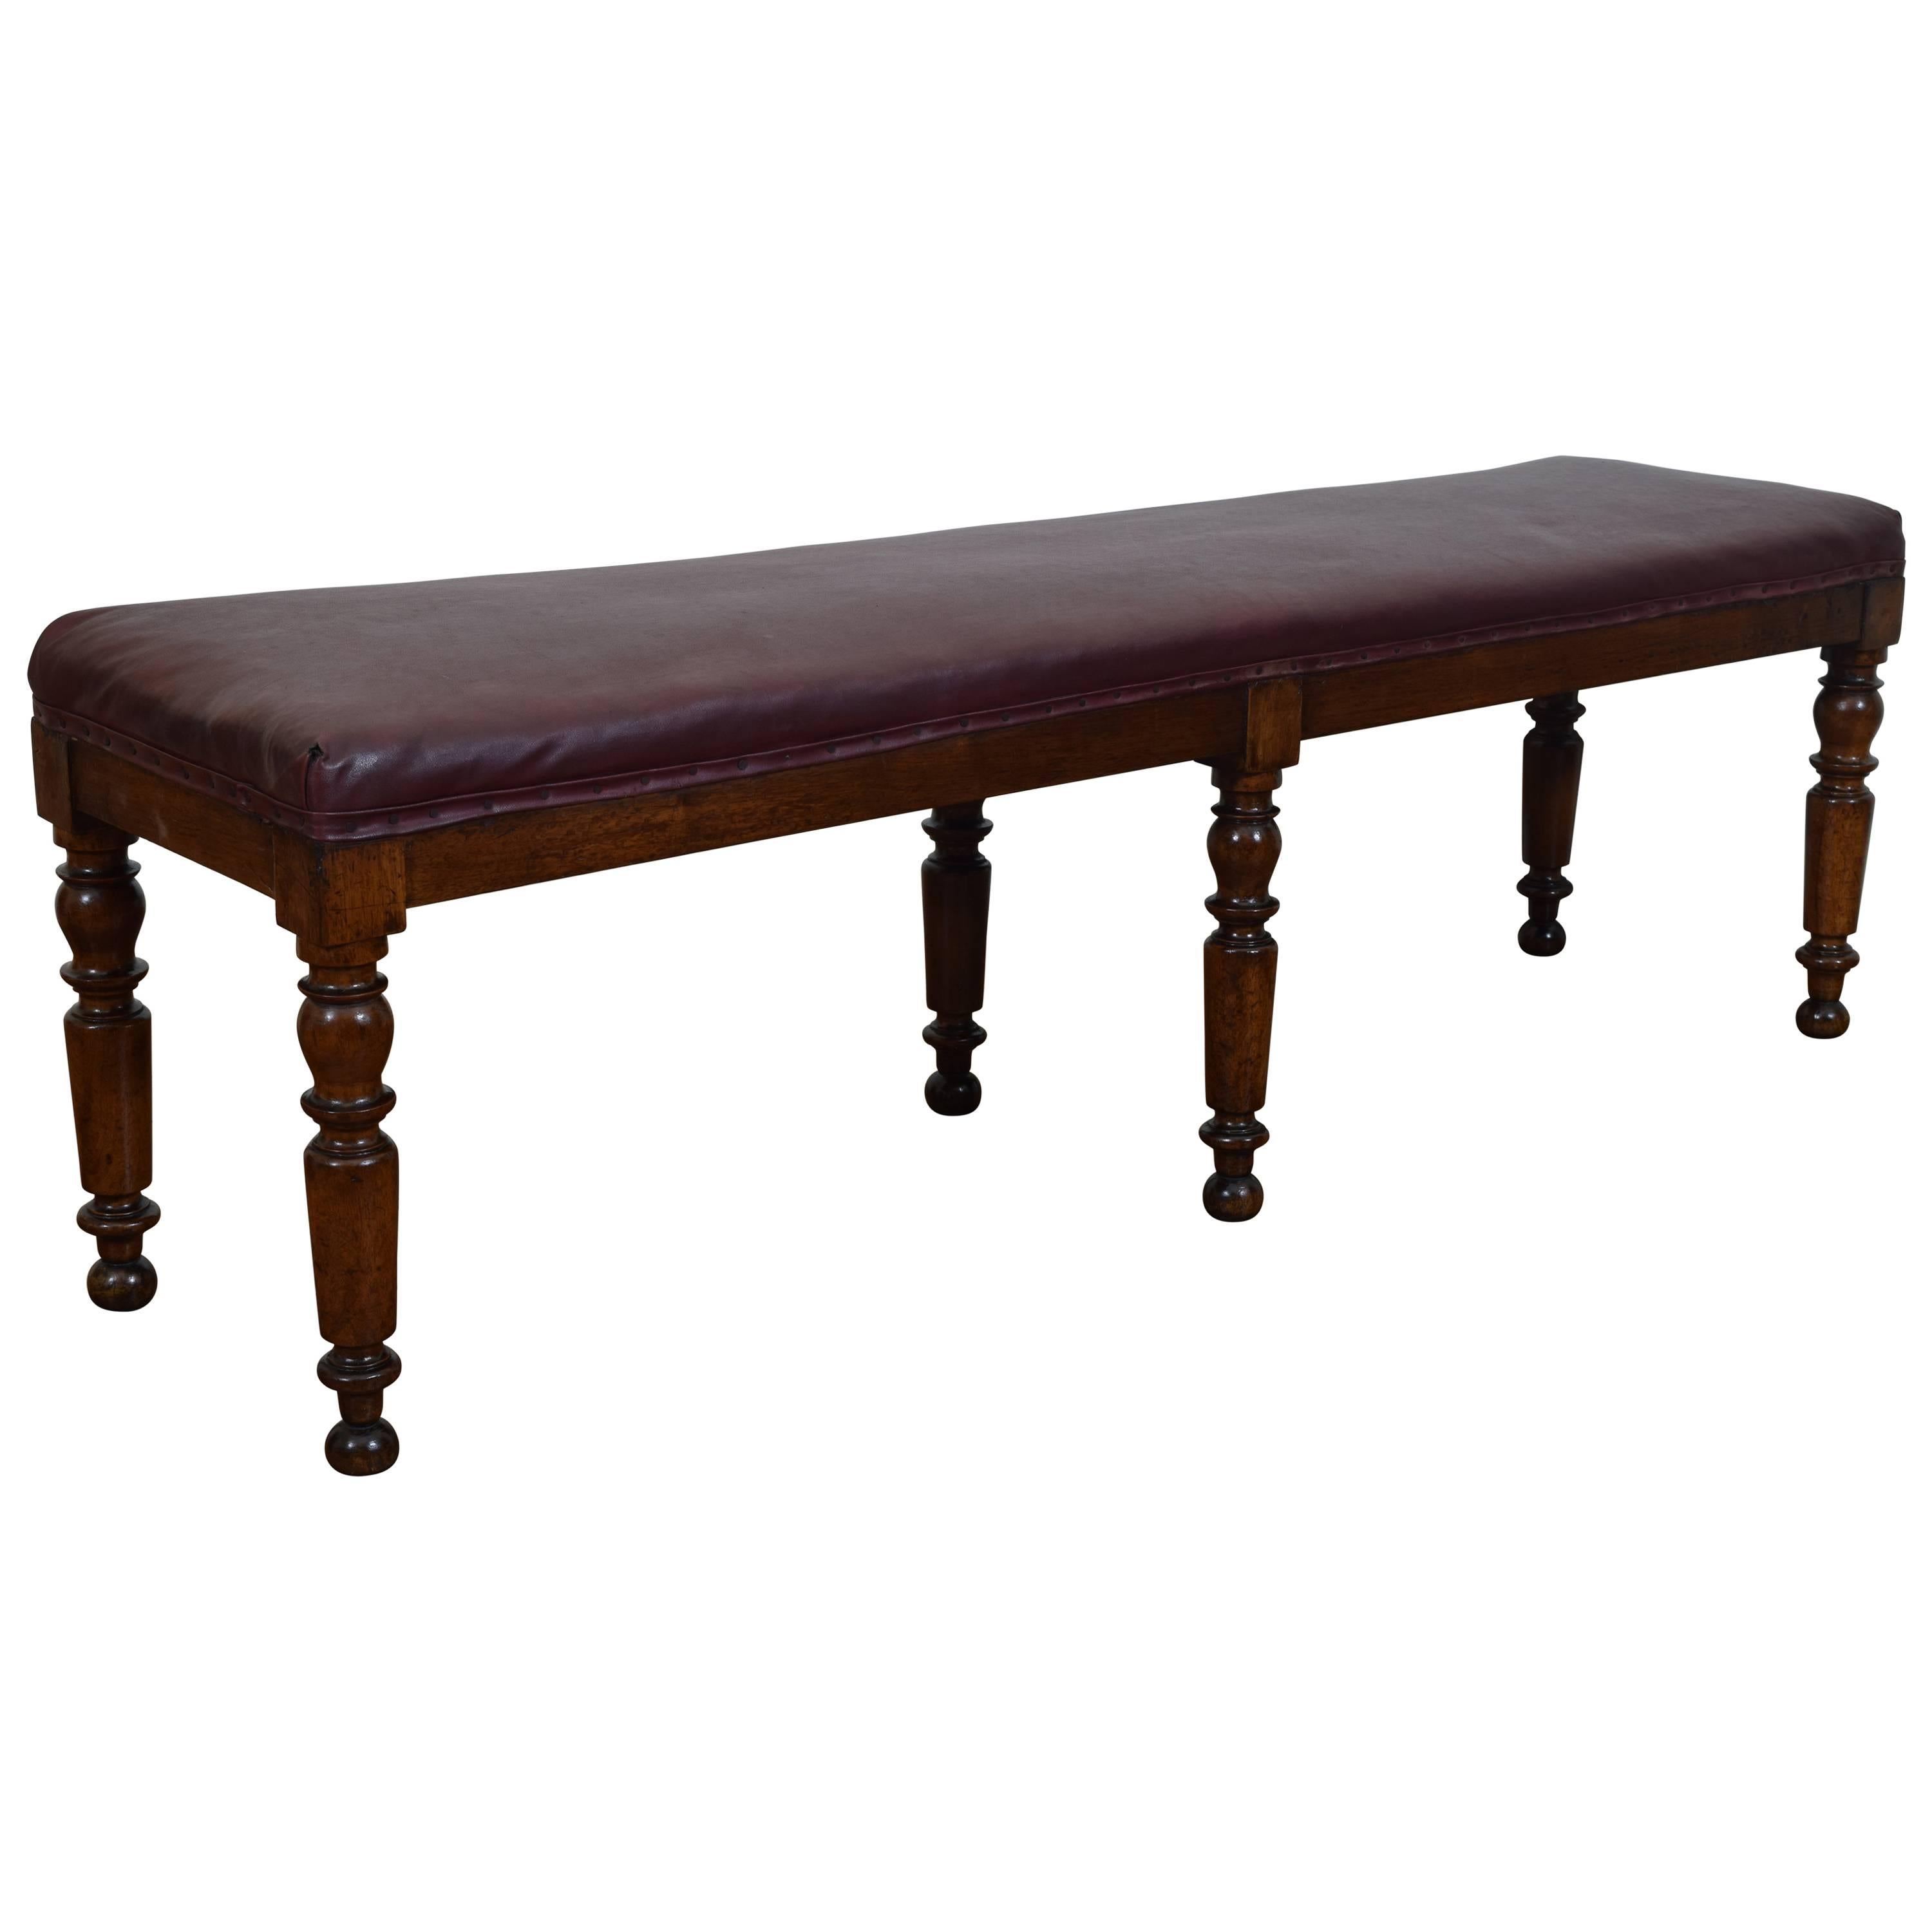 French Louis Philippe Turned Walnut and Upholstered Bench, Mid-19th Century